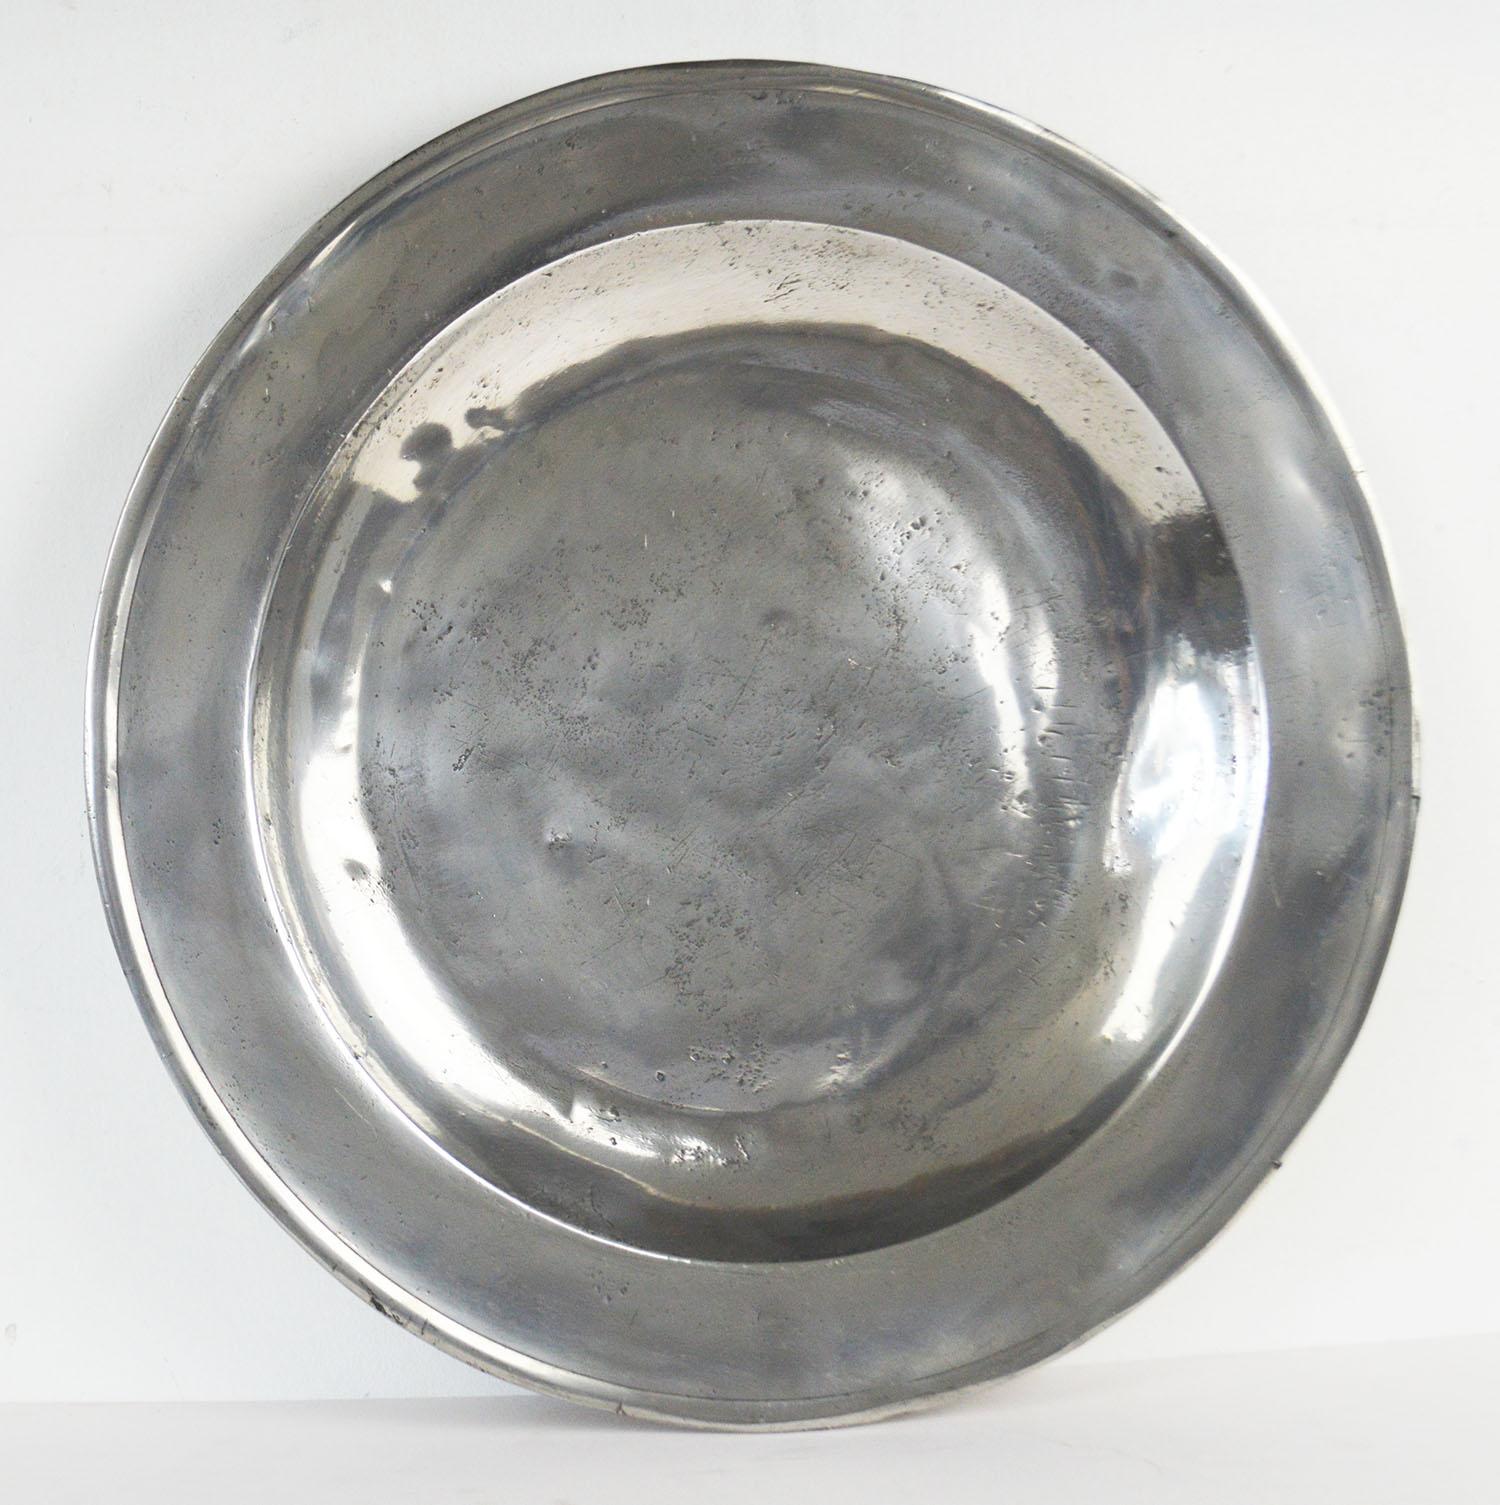 2 Antique Brightly Polished Pewter Chargers, English, 18th Century 6